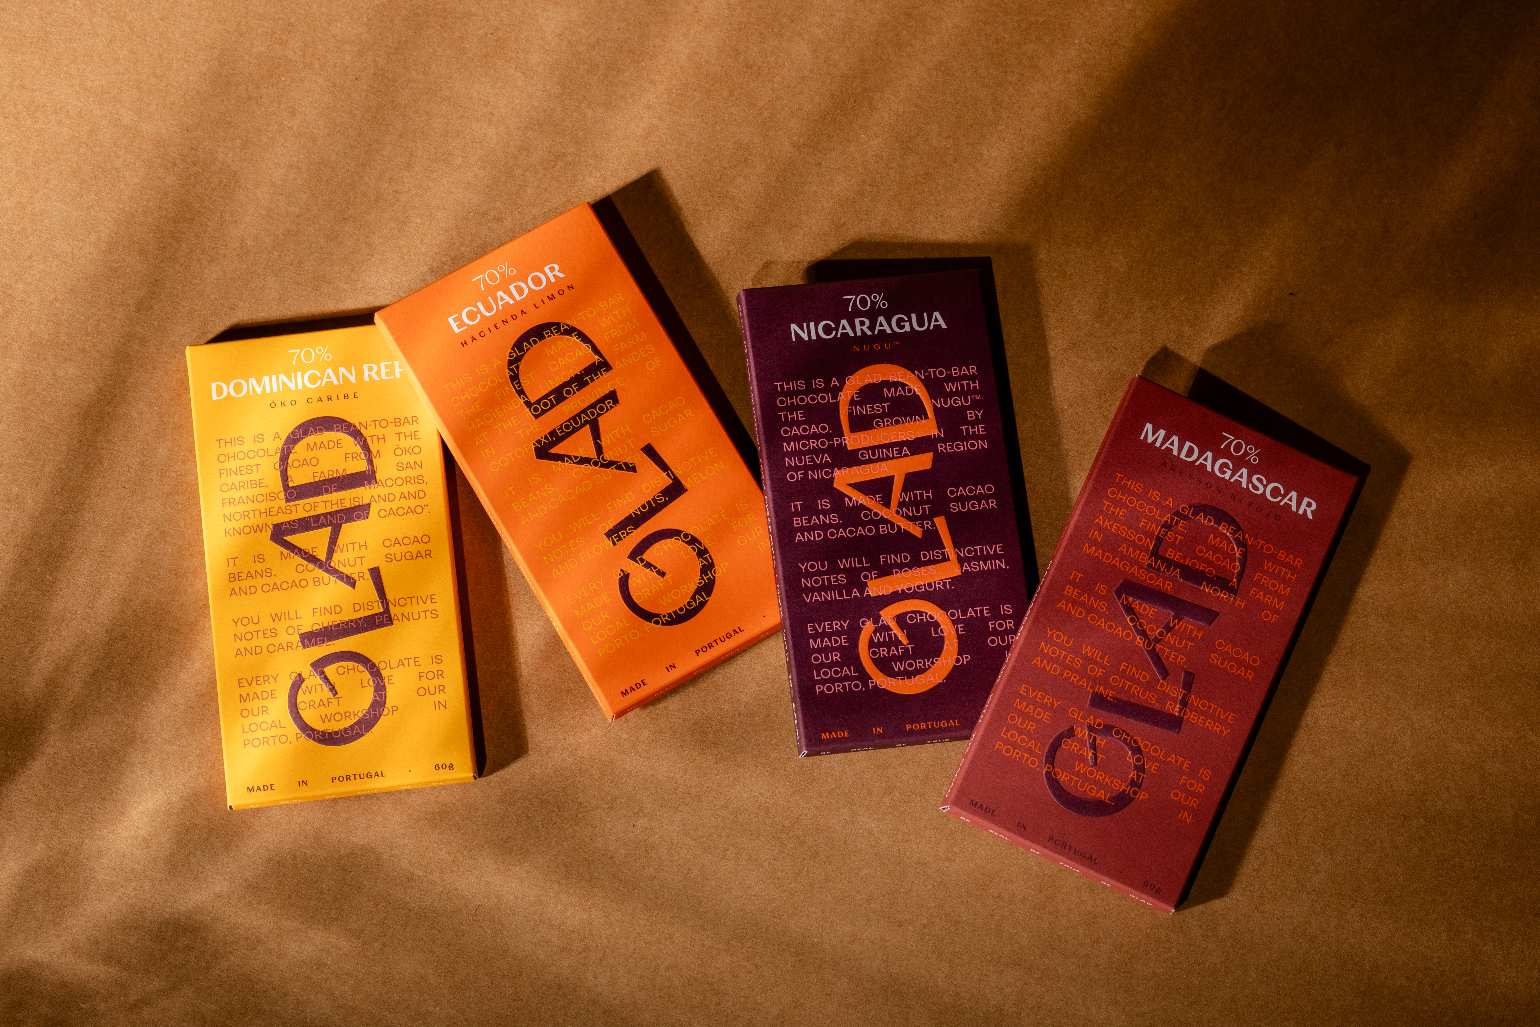 GLAD chocolate bars made with cocoa from different origins: Dominican Republic, Ecuador, Nicaragua and Madagascar.